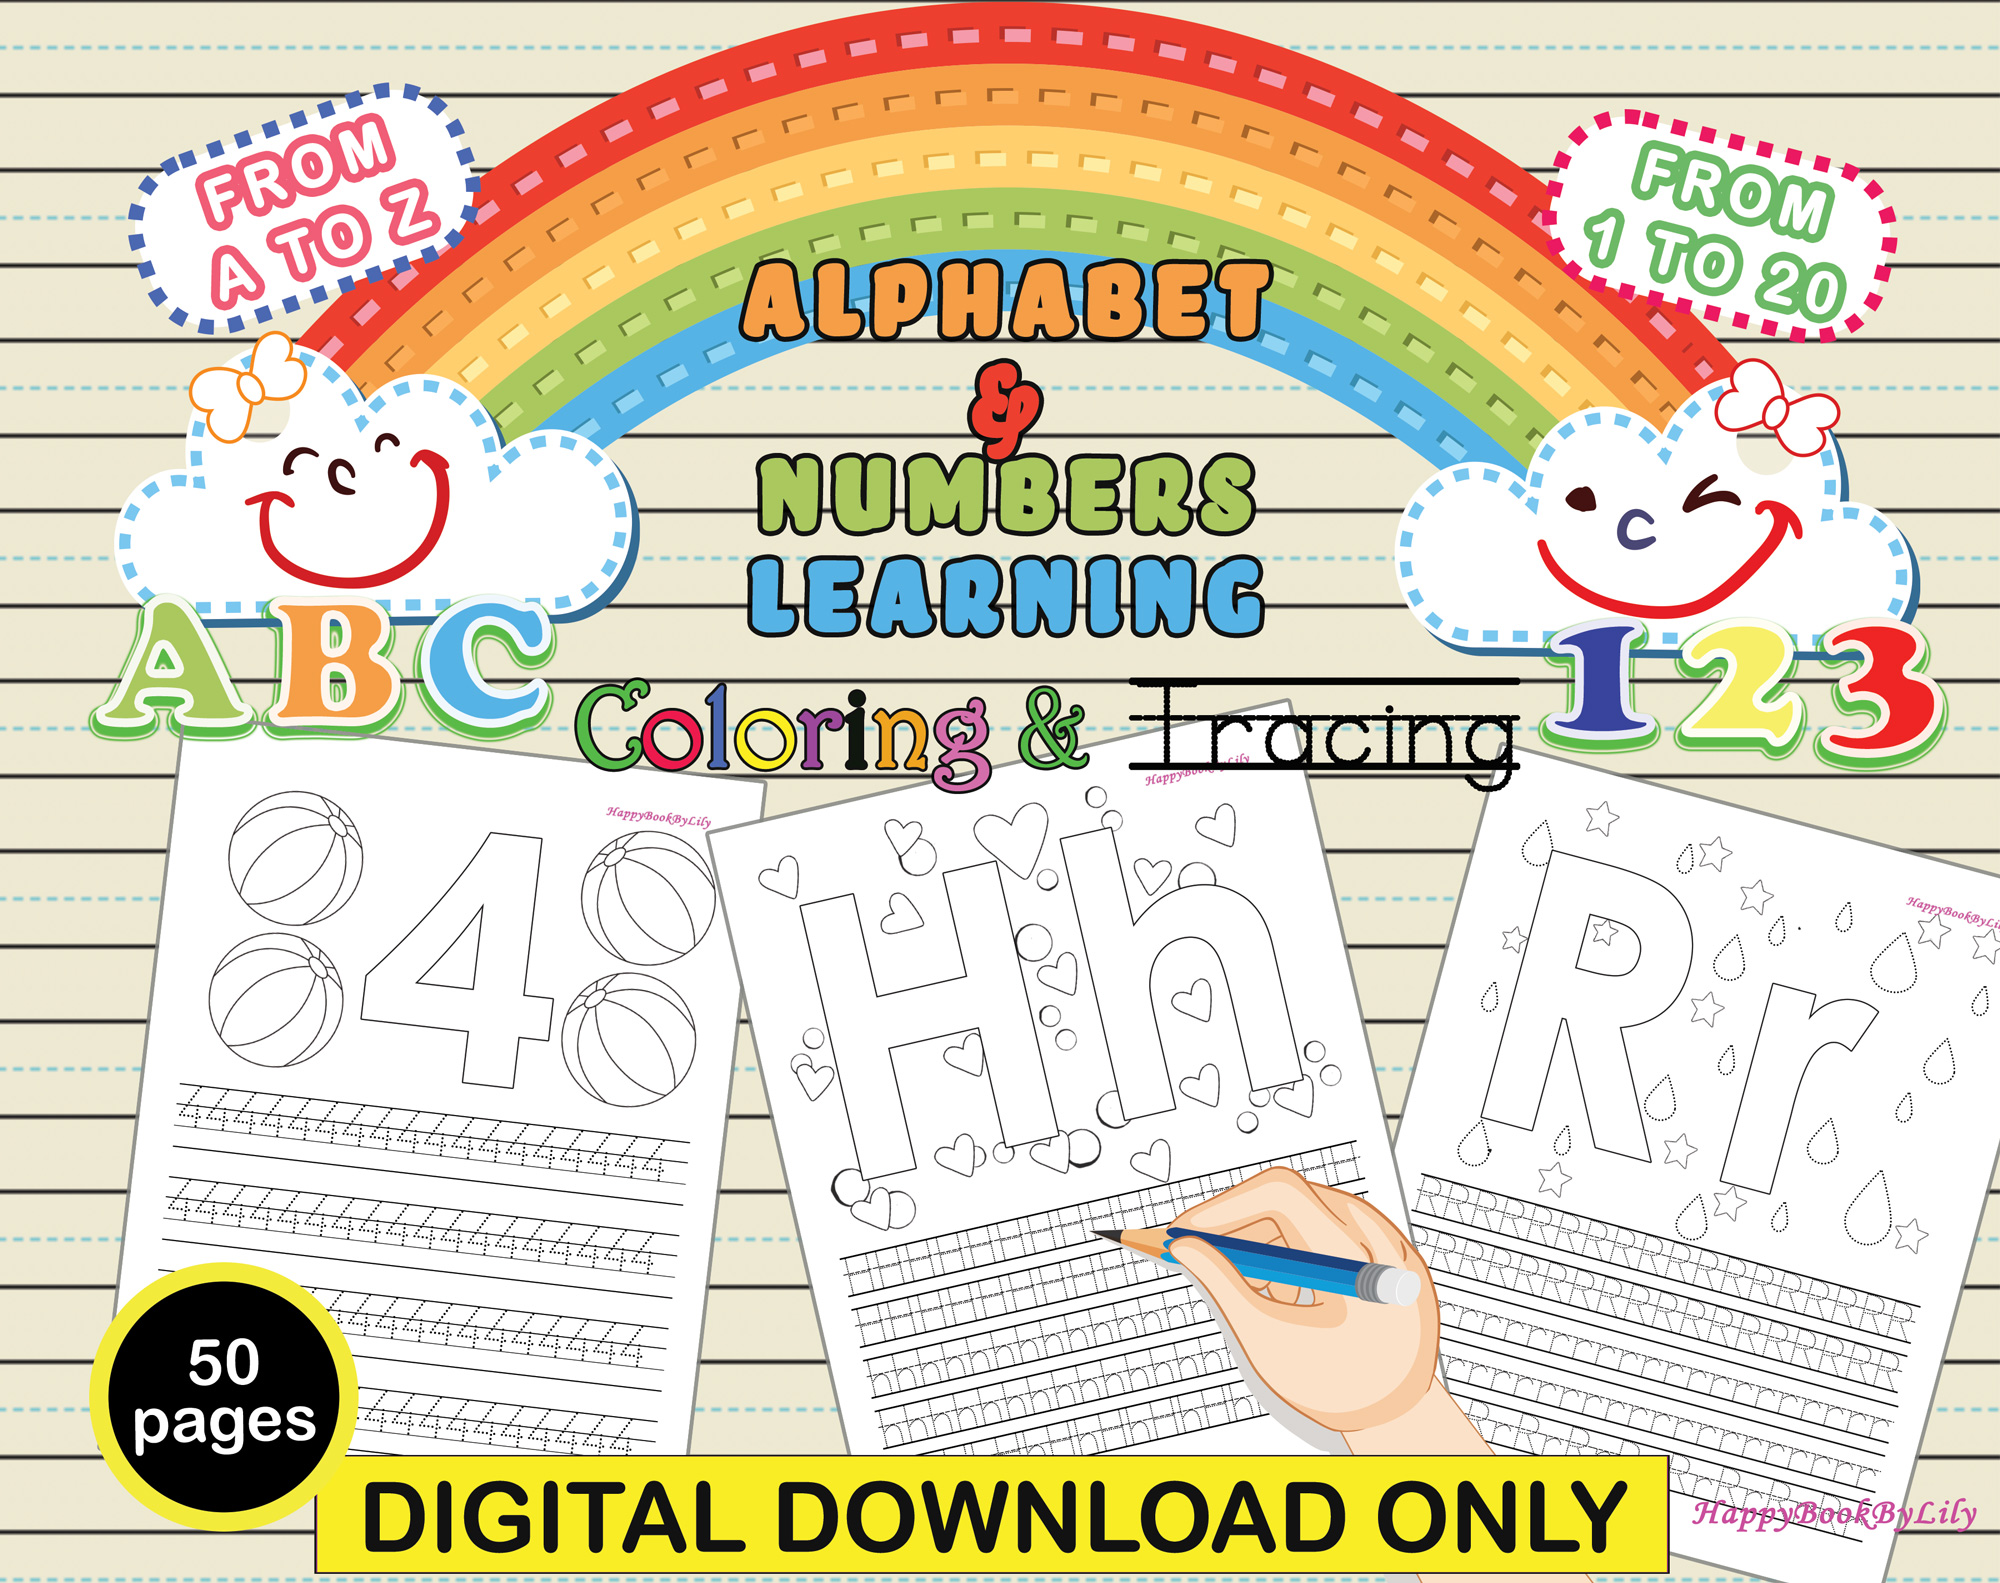 ABC-123/Alphabet and Numbers Coloring & Tracing Pages Printable/From A-Z, 1-20 Pages/Instant Digital Download - PDF